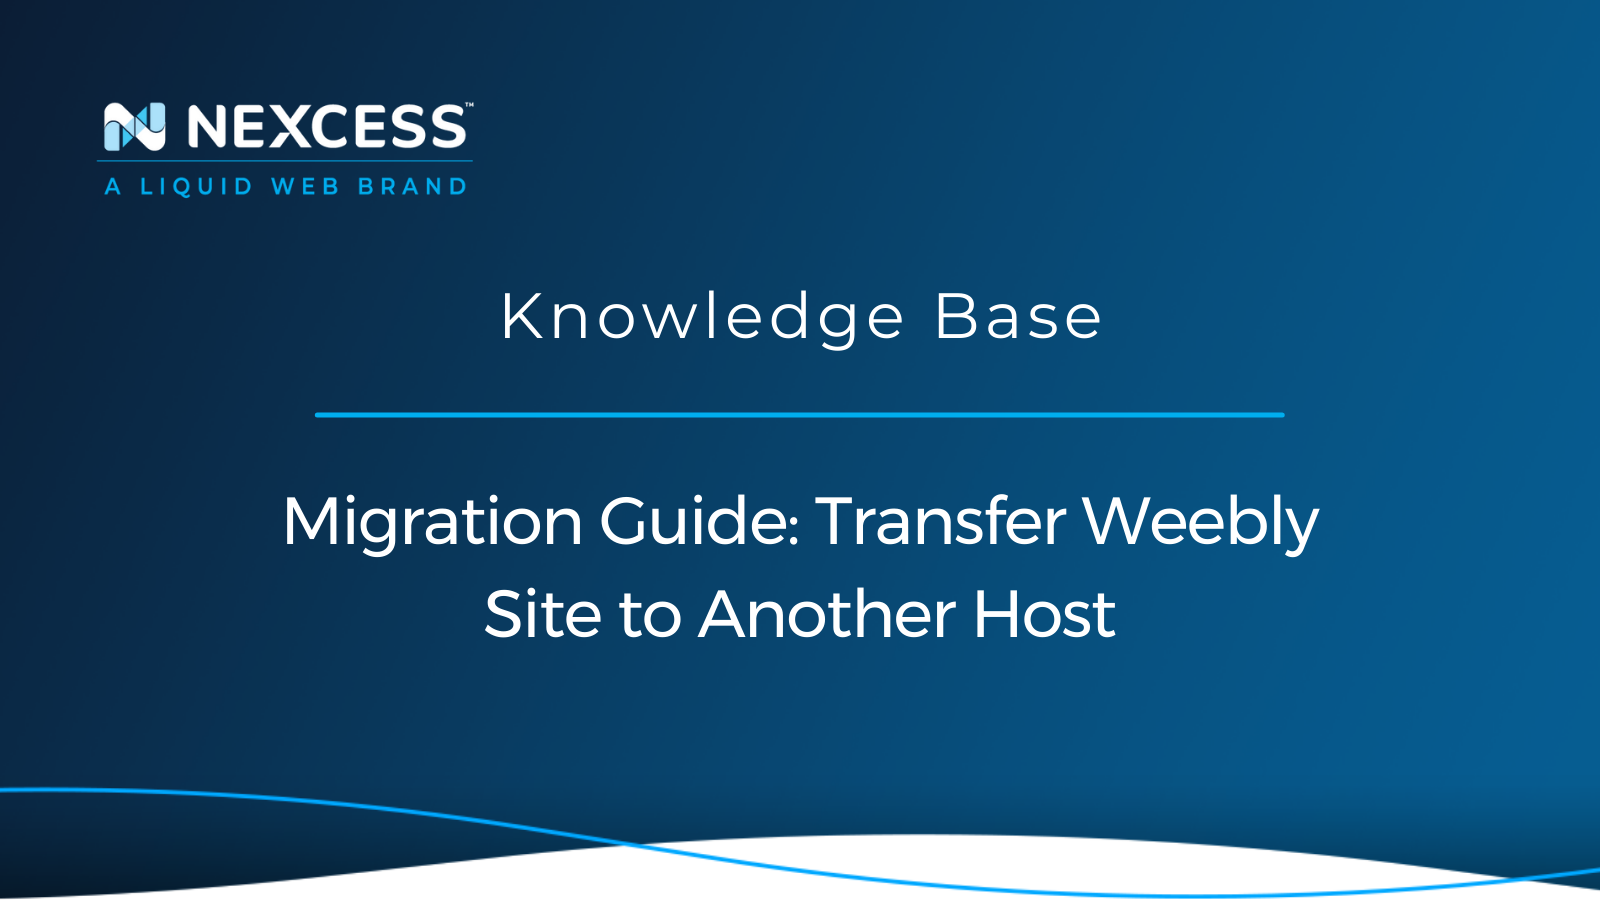 Migration Guide: Transfer Weebly Site to Another Host